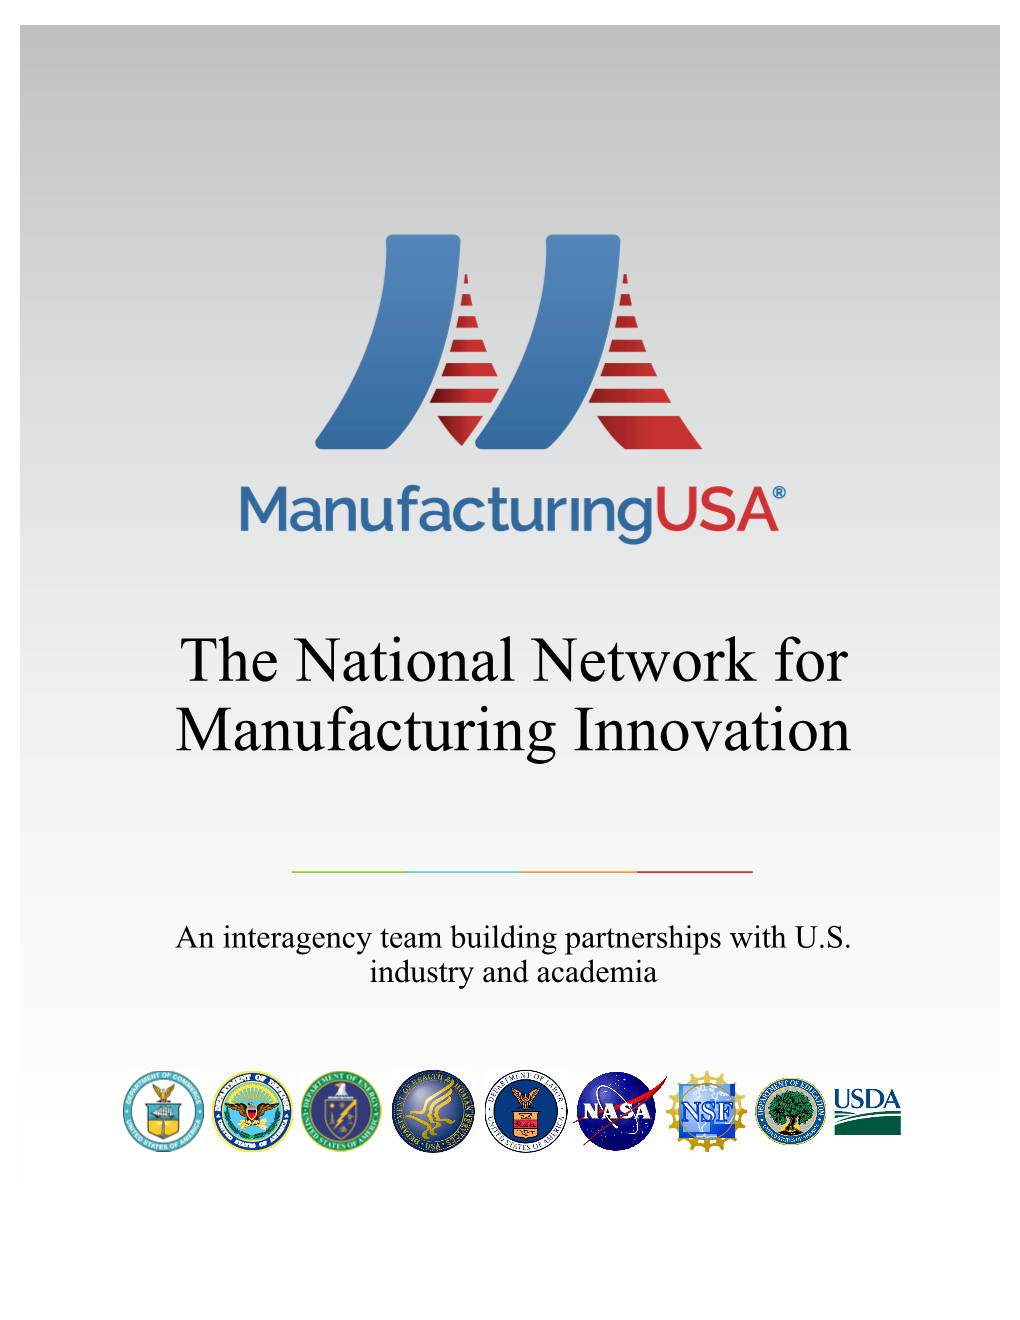 Manufacturing USA Overview Brochure